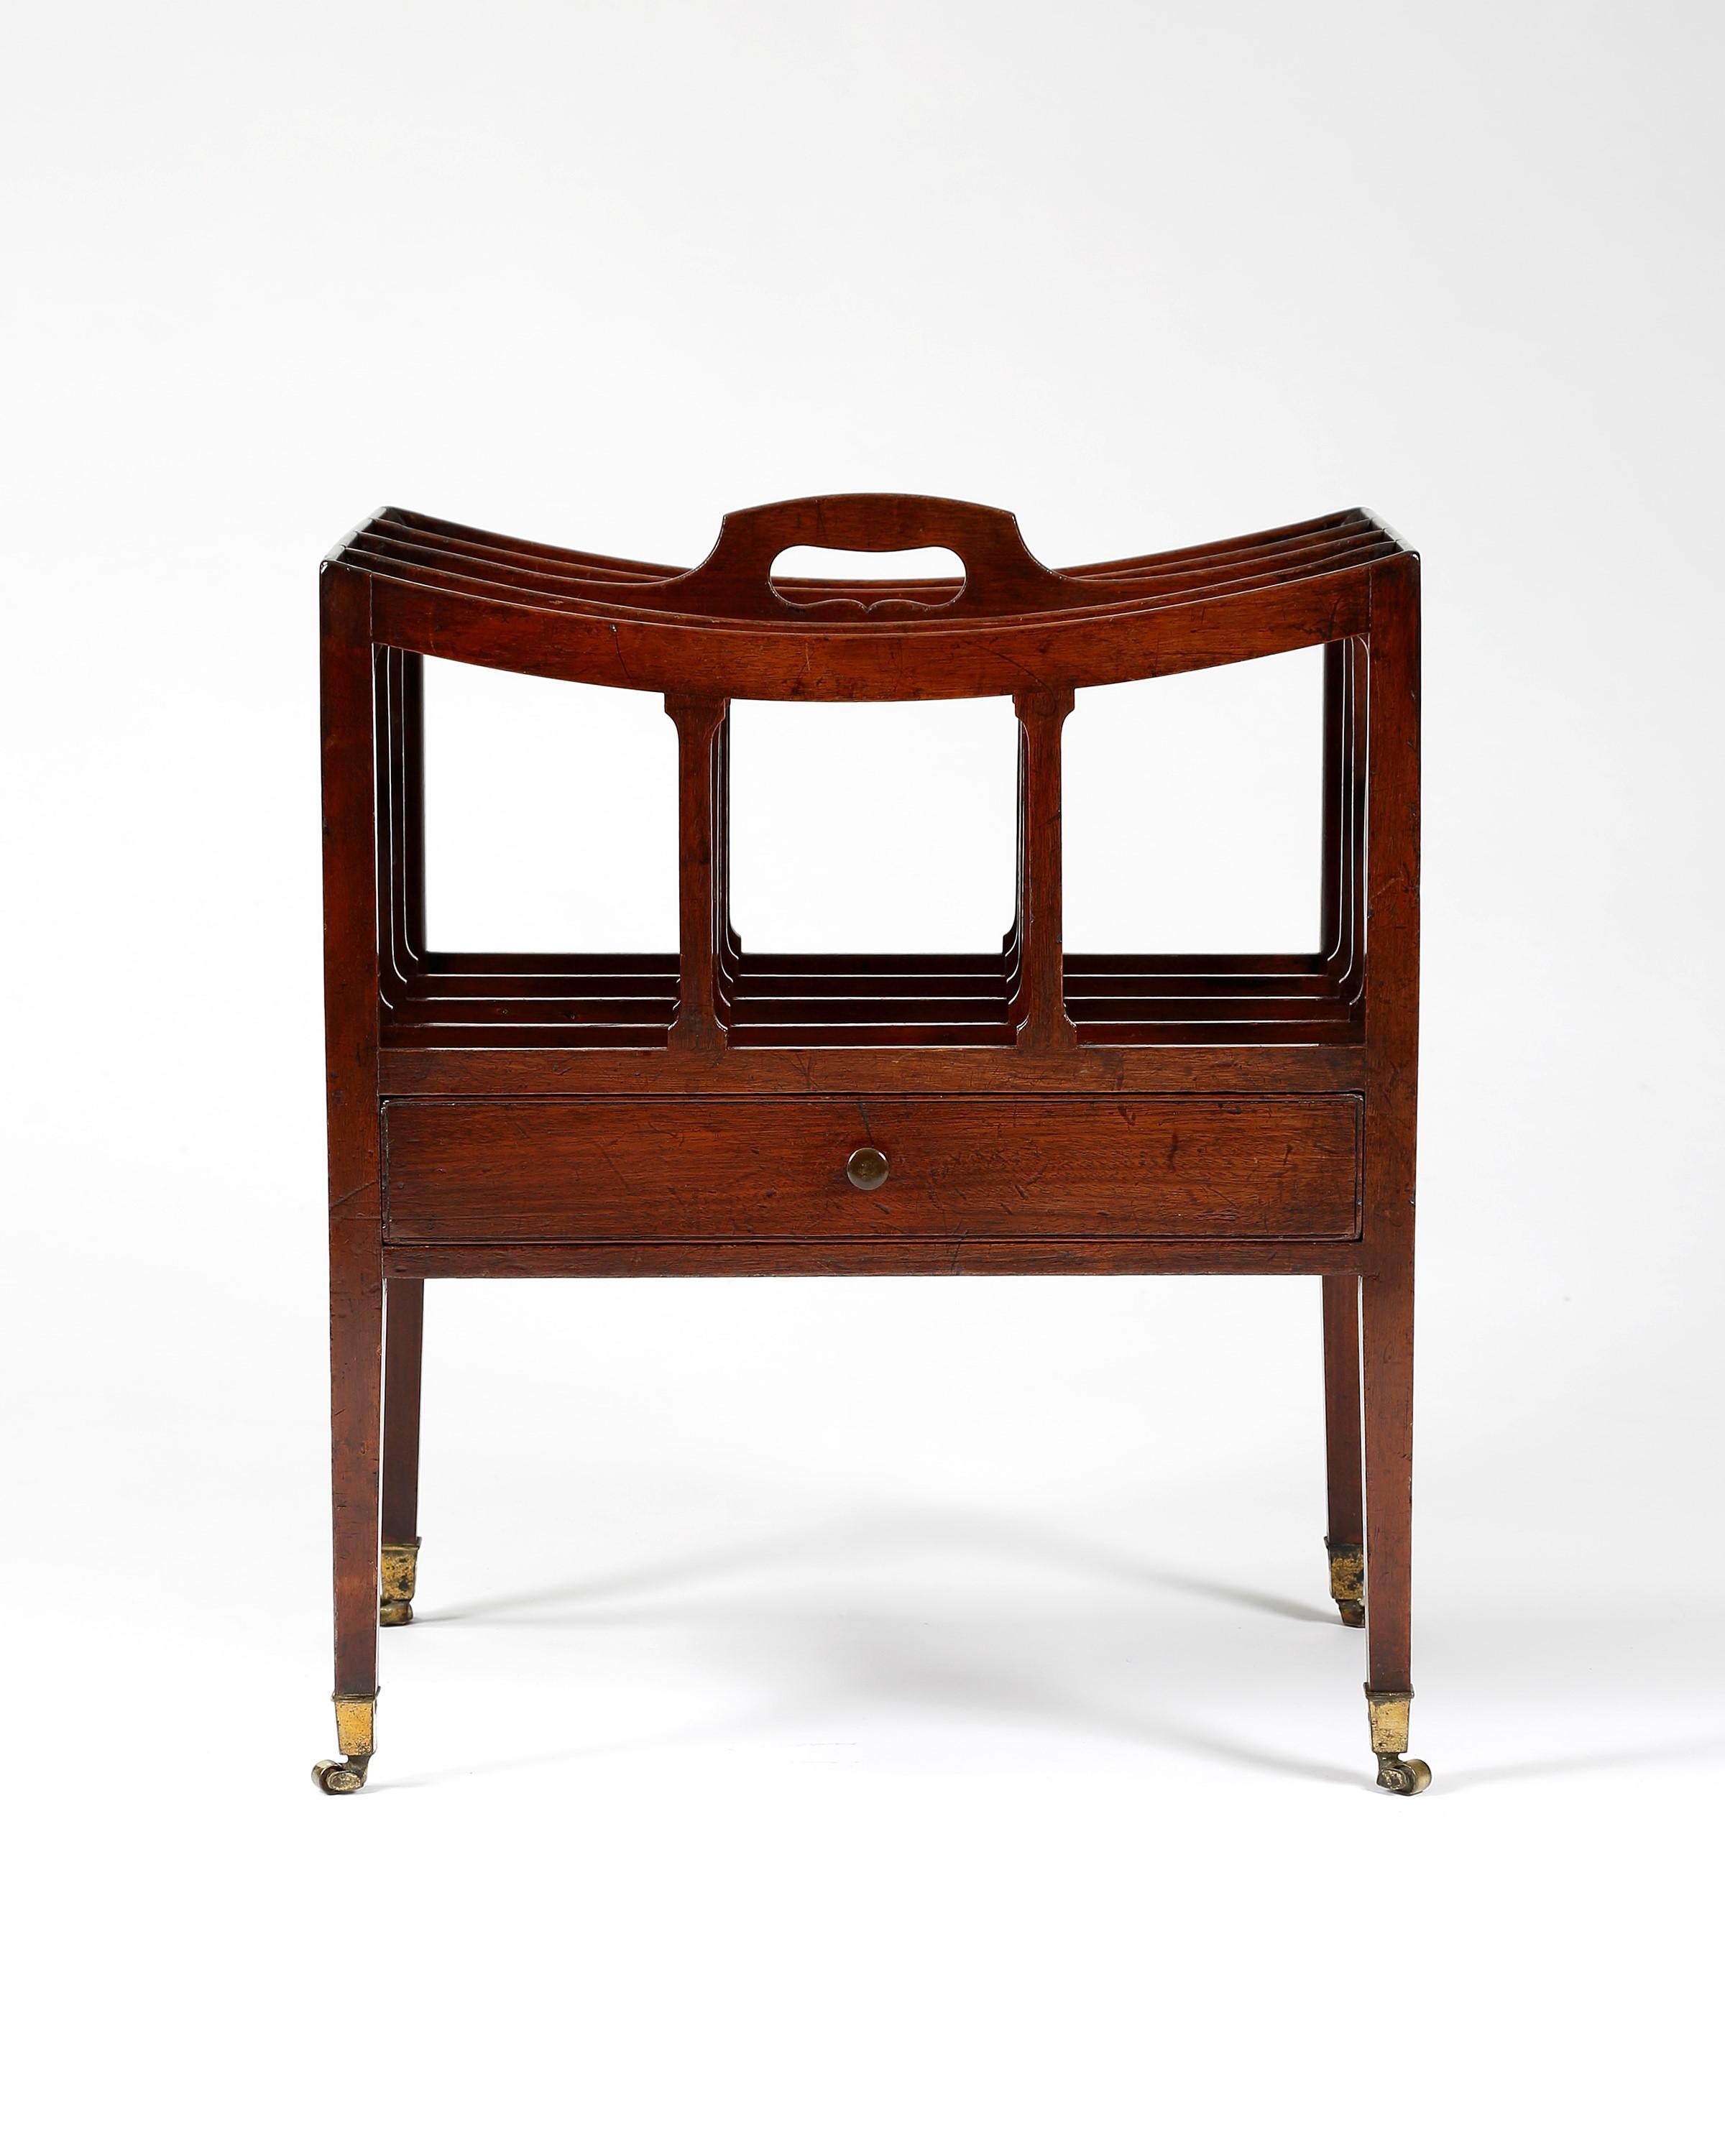 Mahogany music canterbury made by Gillows of Lancaster, with four slatted divisions, pierced carrying handle above a drawer. Raised on four square tapering legs onto barrel castors, English, 1800. Ref details page 91 Vol II Susan E. Stuart. Gillows